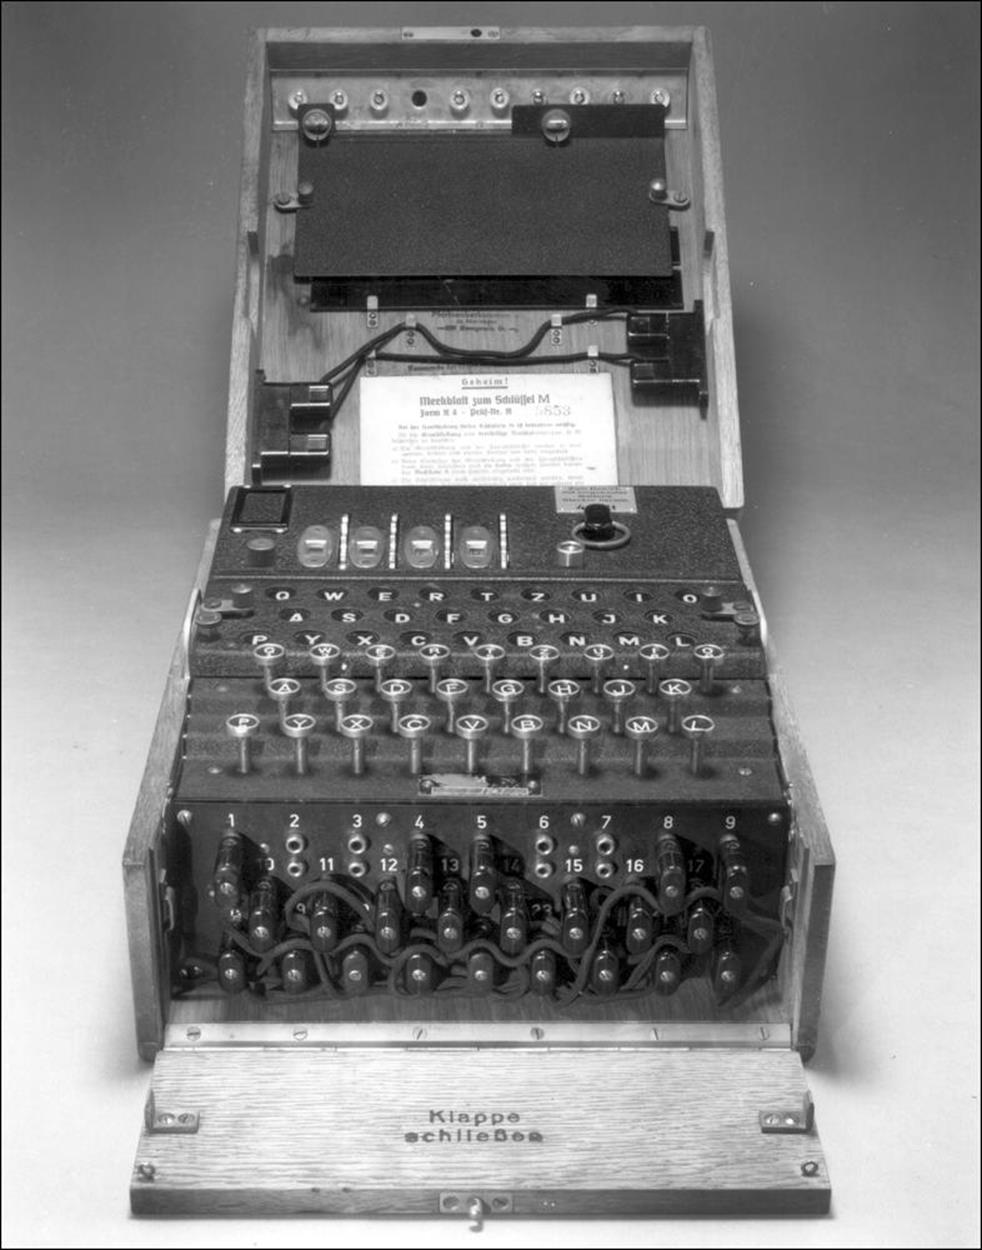 The Enigma machine (reproduced by permission of the Smithsonian Institution)